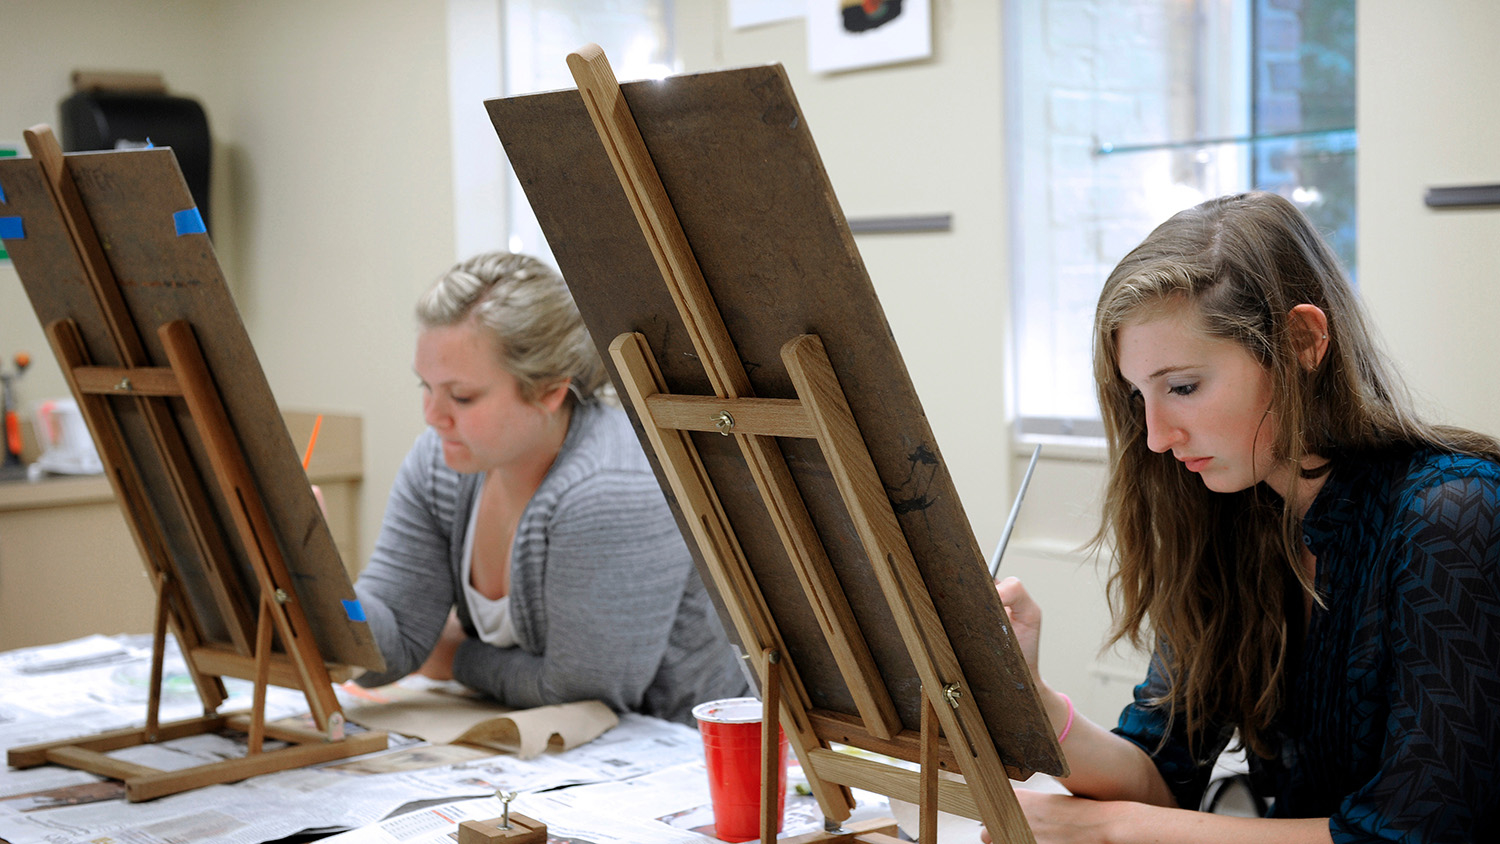 Students work on a painting during a class at the Craft Center in Thompson.